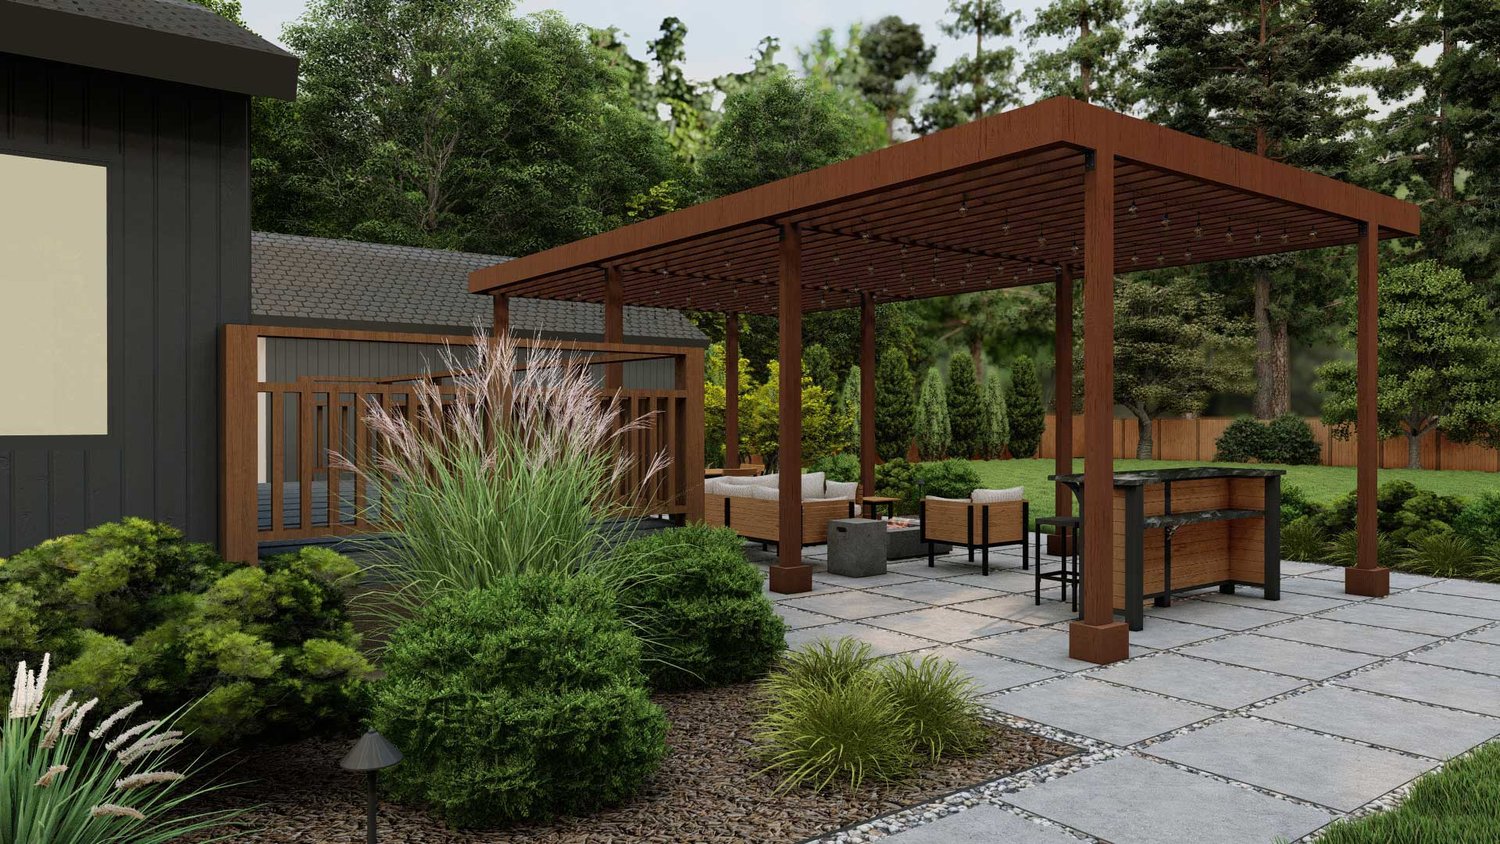 Bellevue backyard showing beautiful plants and sitting area with pergola built over it